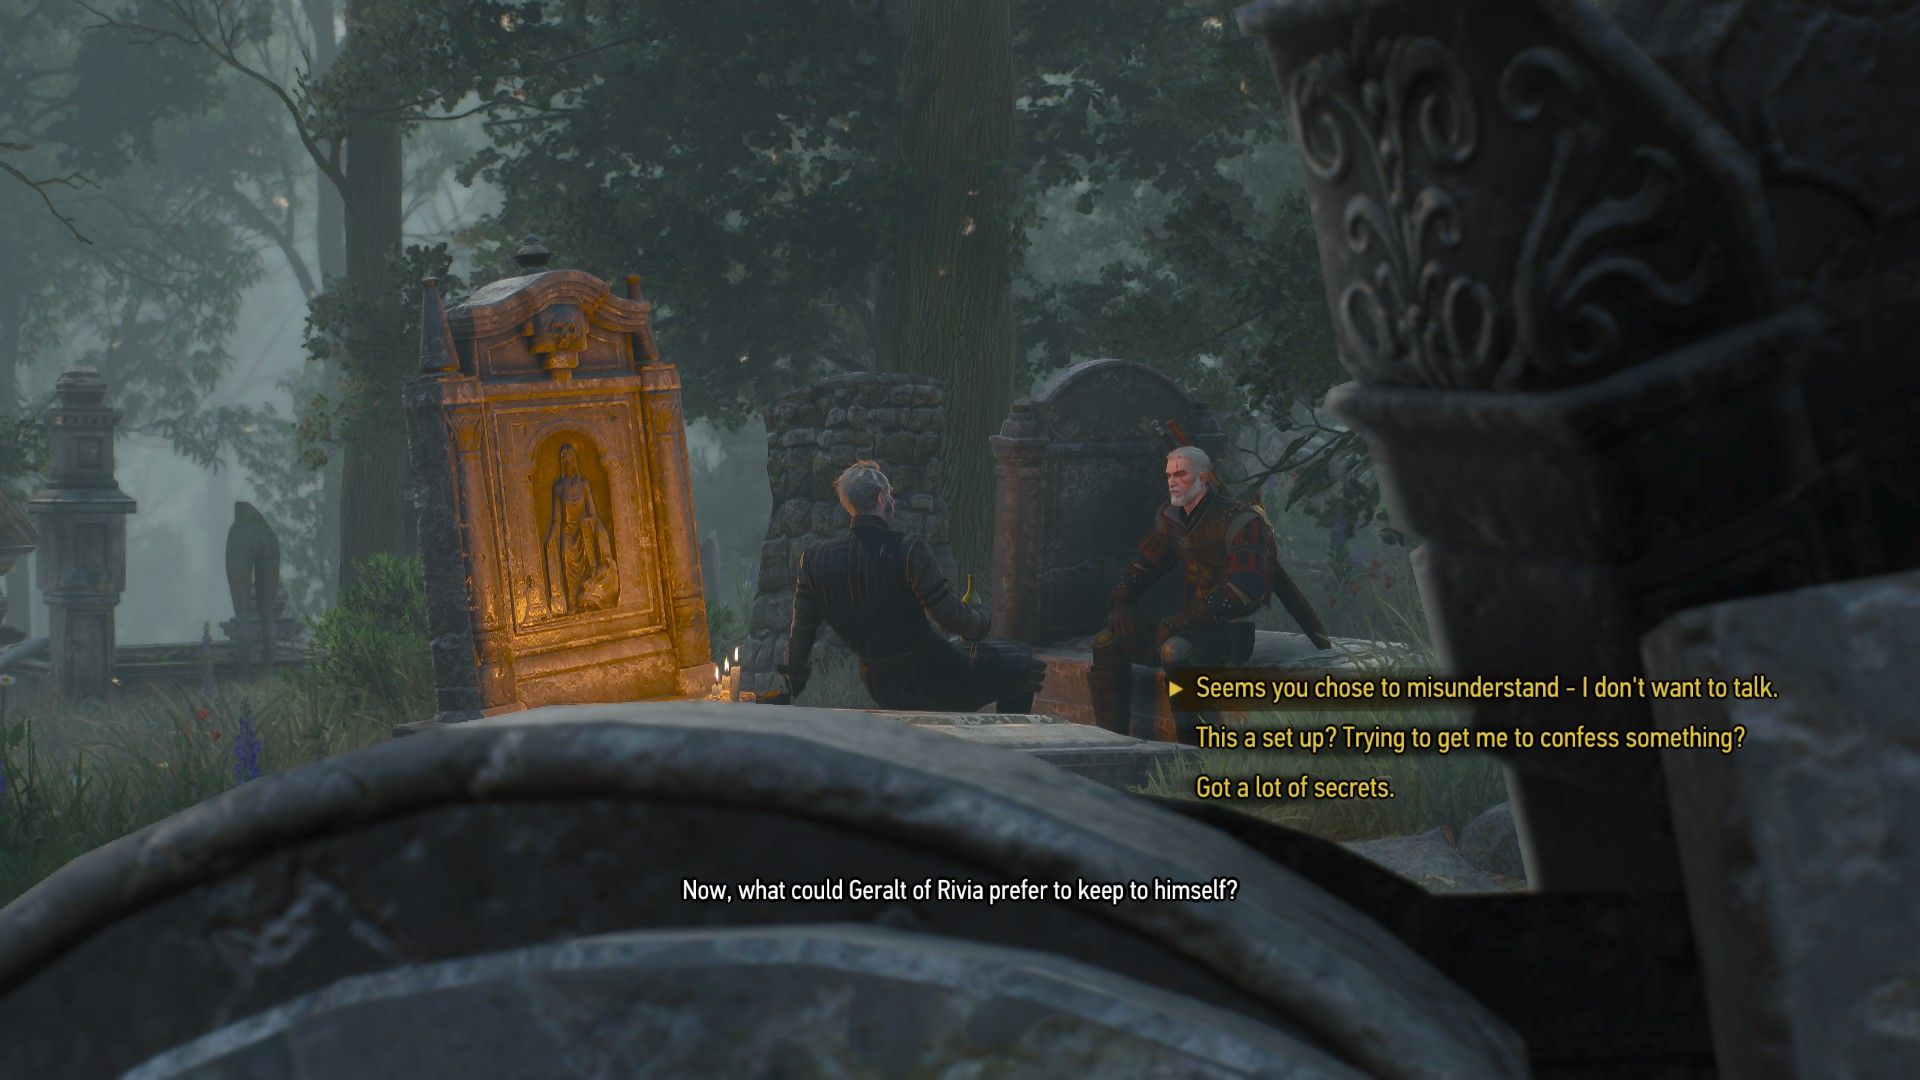 Screenshot of Geralt and Regis conversing in the graveyard with conversation options displayed.